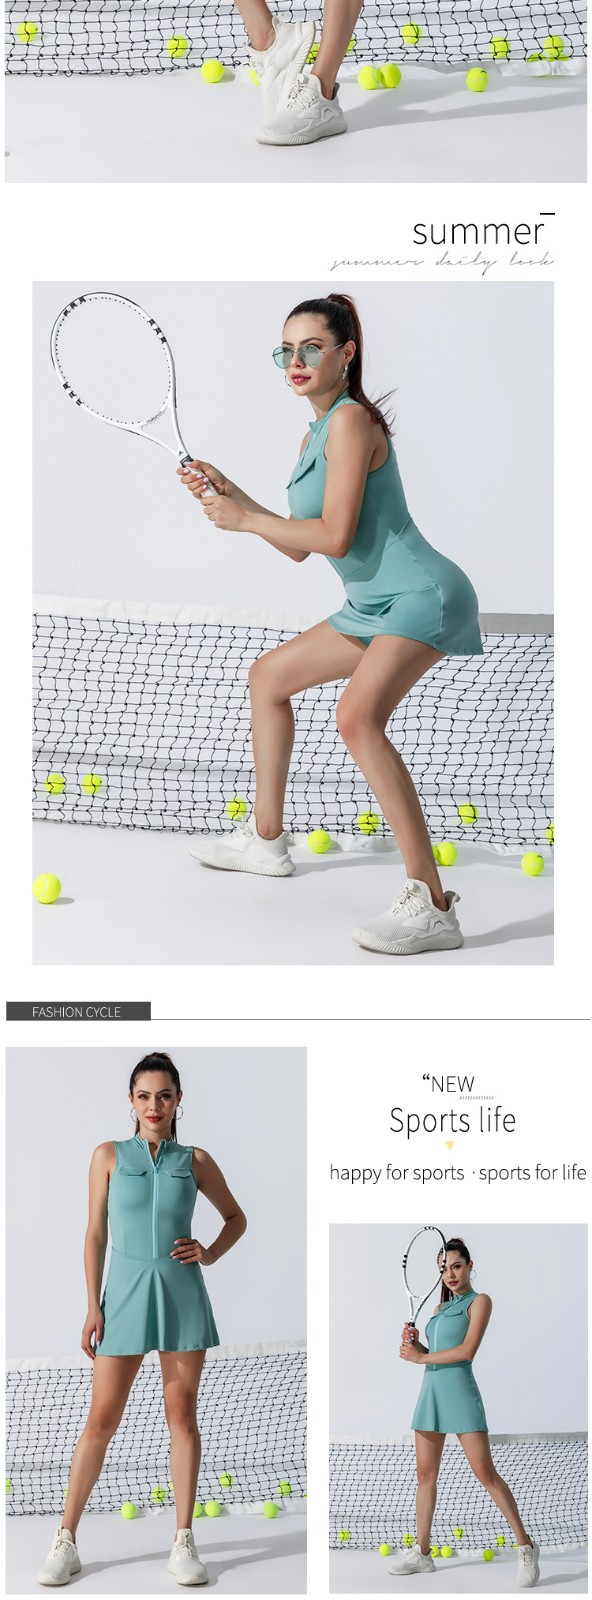 INGOR personalized woman tennis clothes supplier for ladies-5